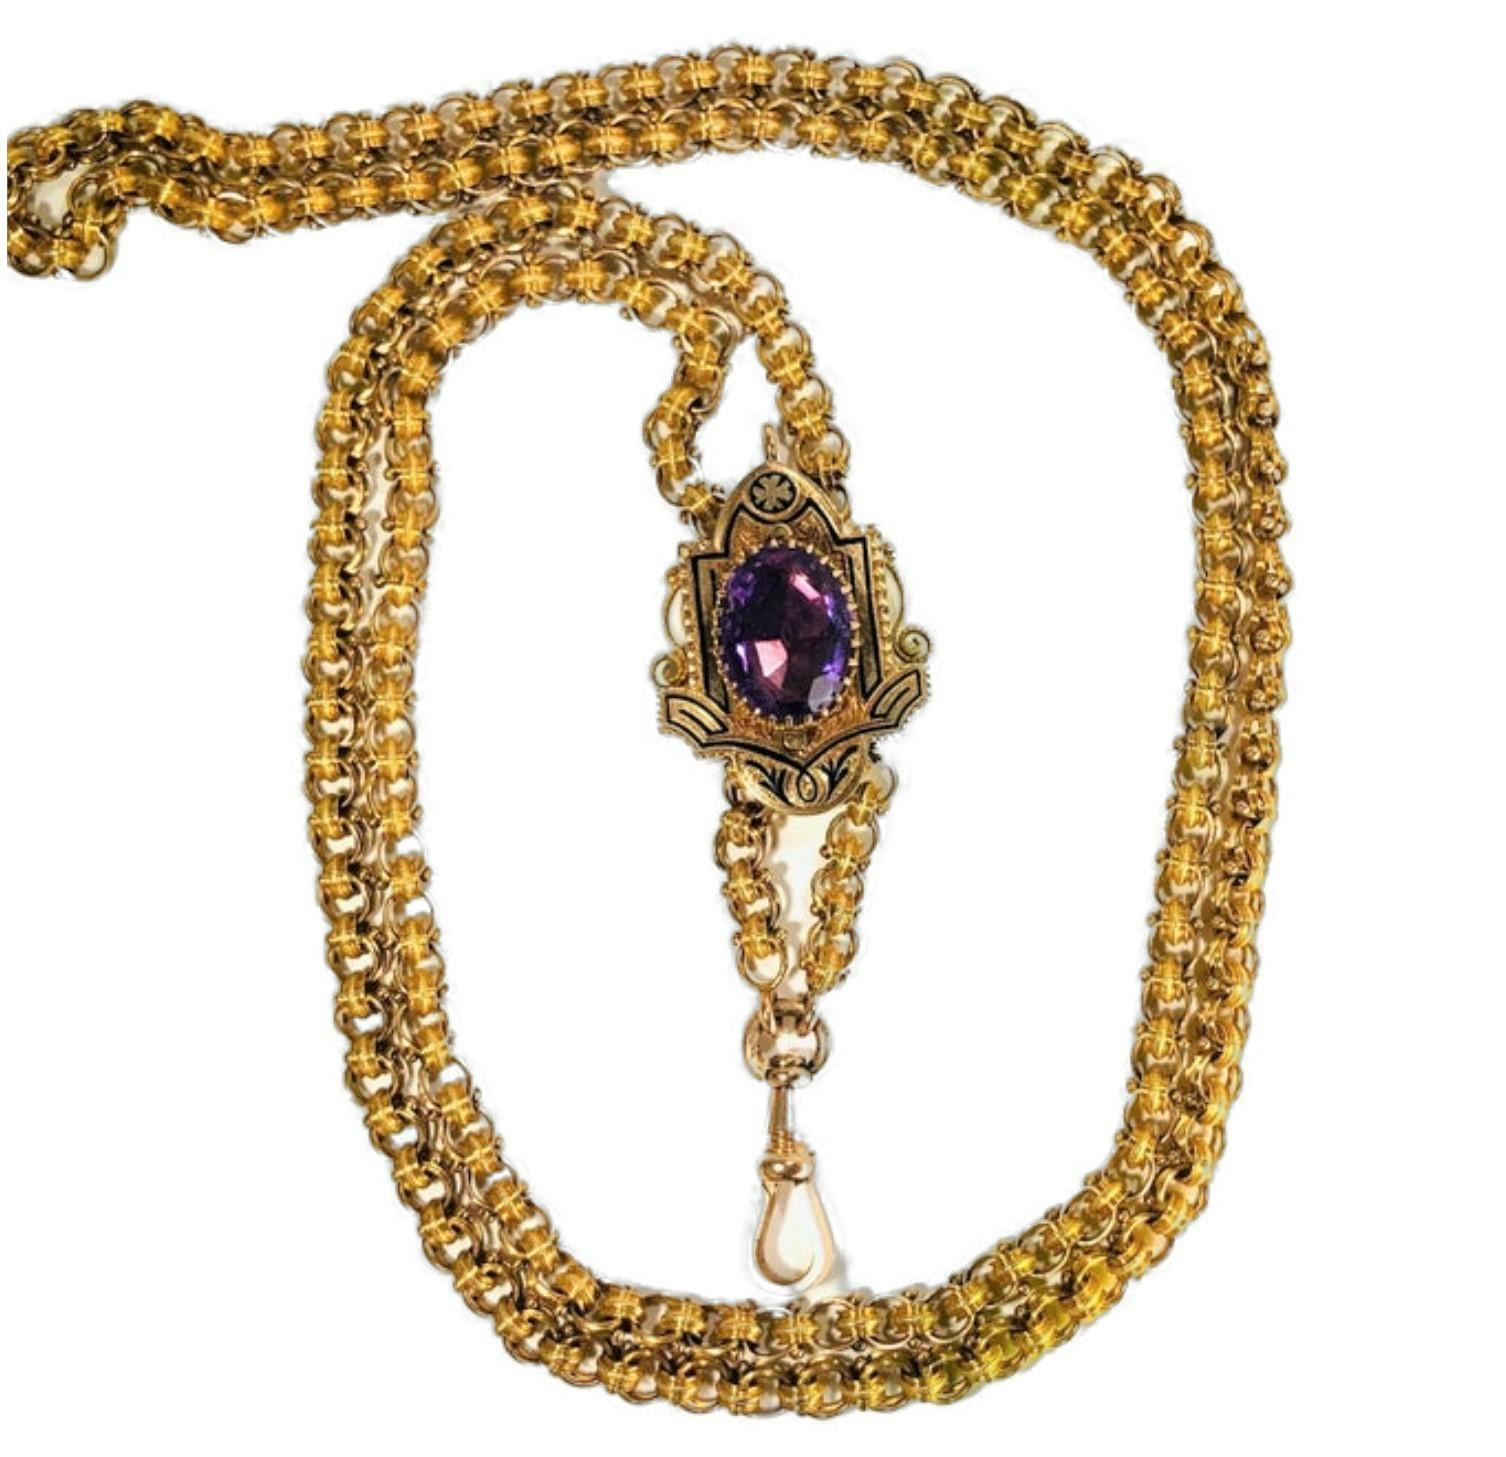 This wonderful, authentic, Victorian 14K Yellow Gold slide necklace is a full 60 inches long, and features a slide set with one large oval cut Amethyst, framed by engraved gold and black enamel. Each individual link is beaded and the necklace has,